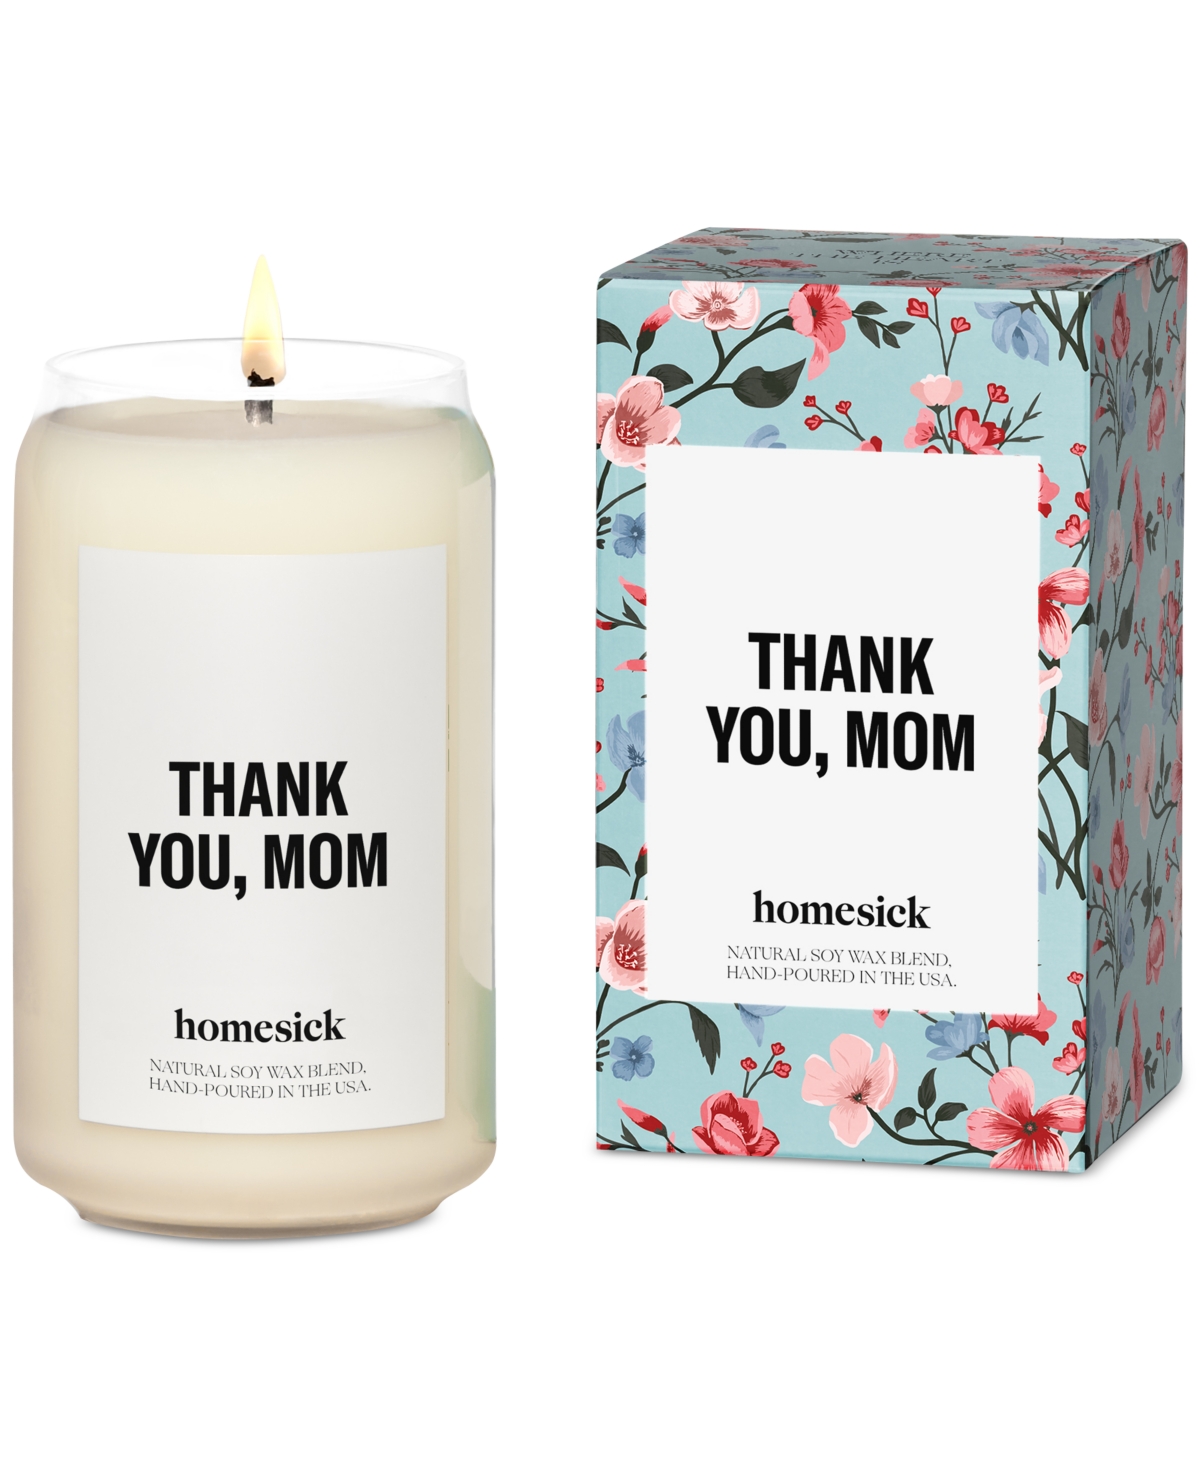 Thank You, Mom Candle, 13.75-oz. - Natural